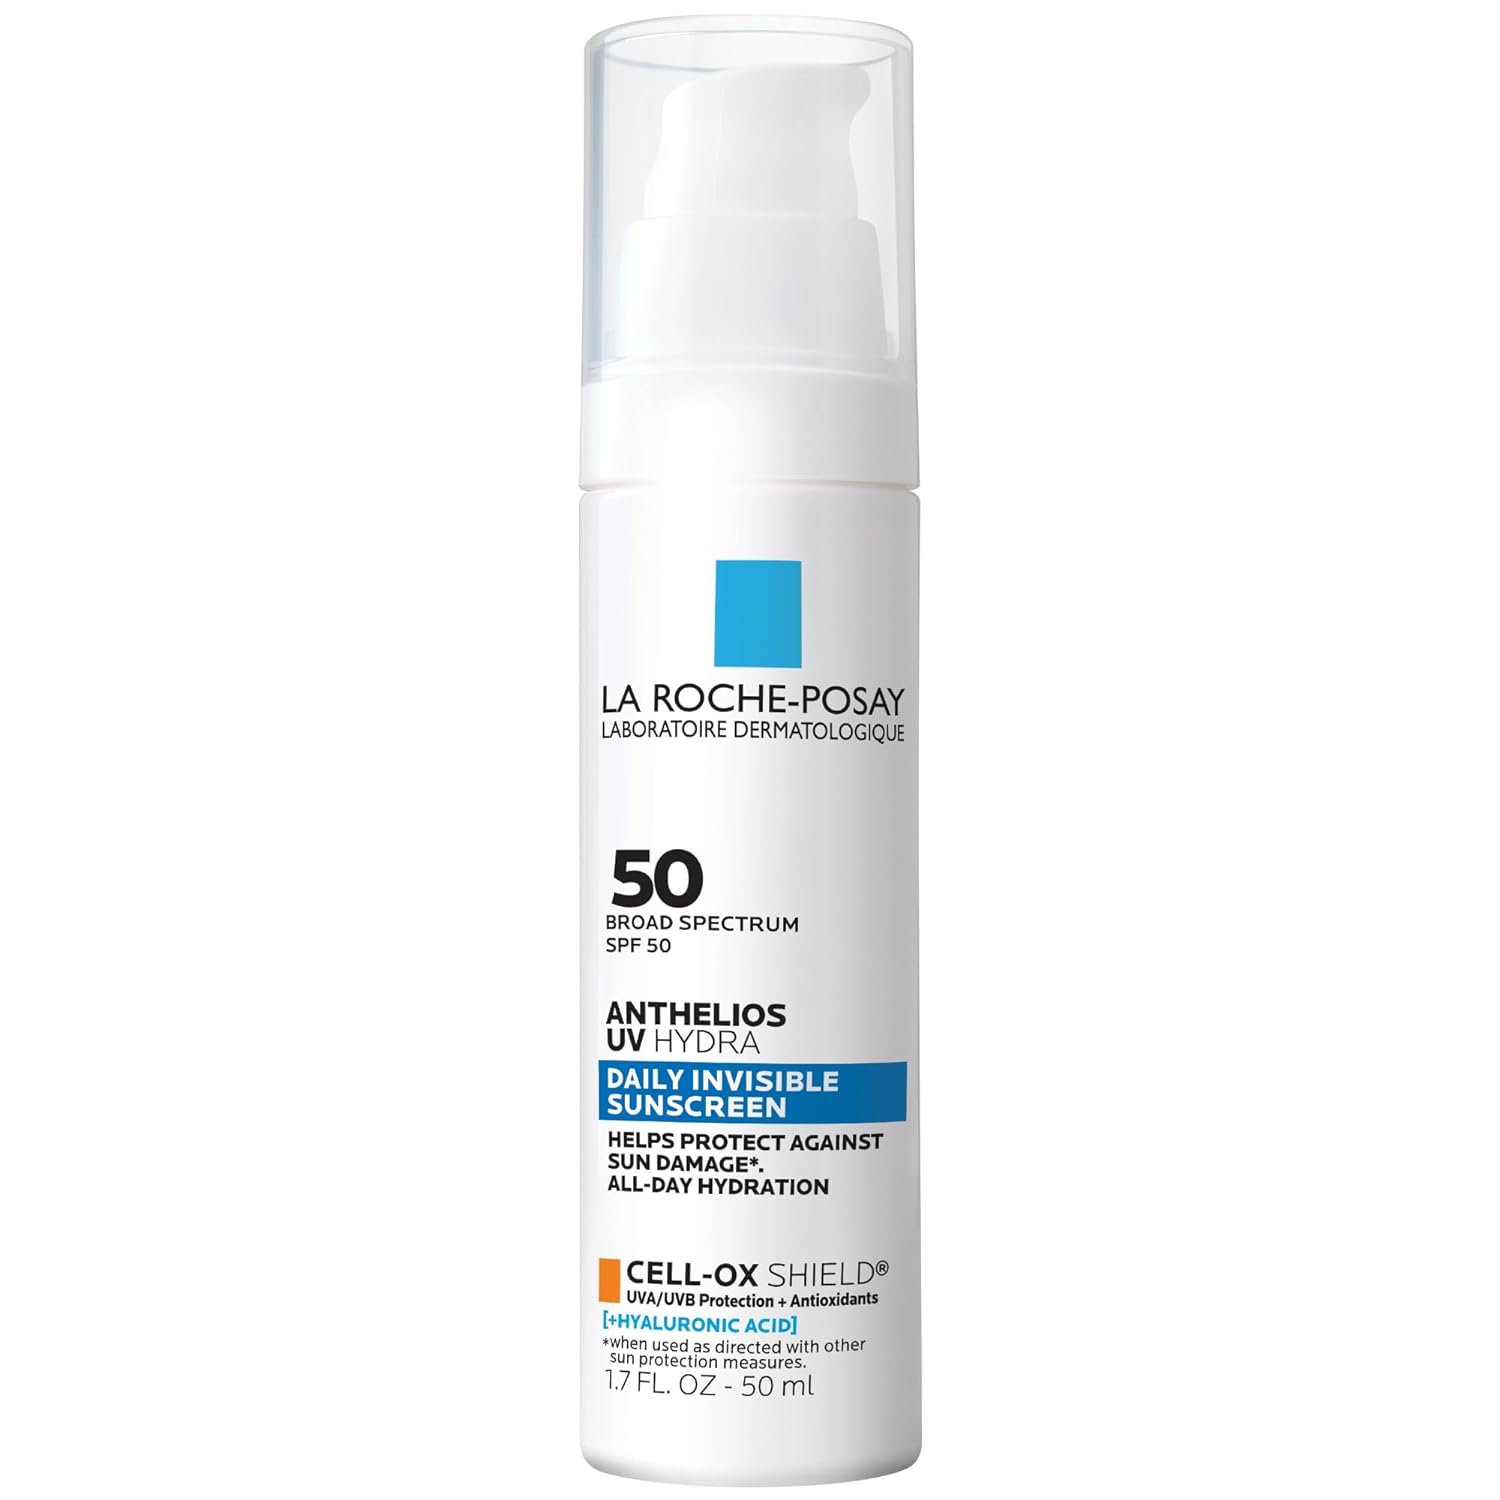 La Roche-Posay Anthelios UV Hydra SPF 50 shop at Exclusive Beauty